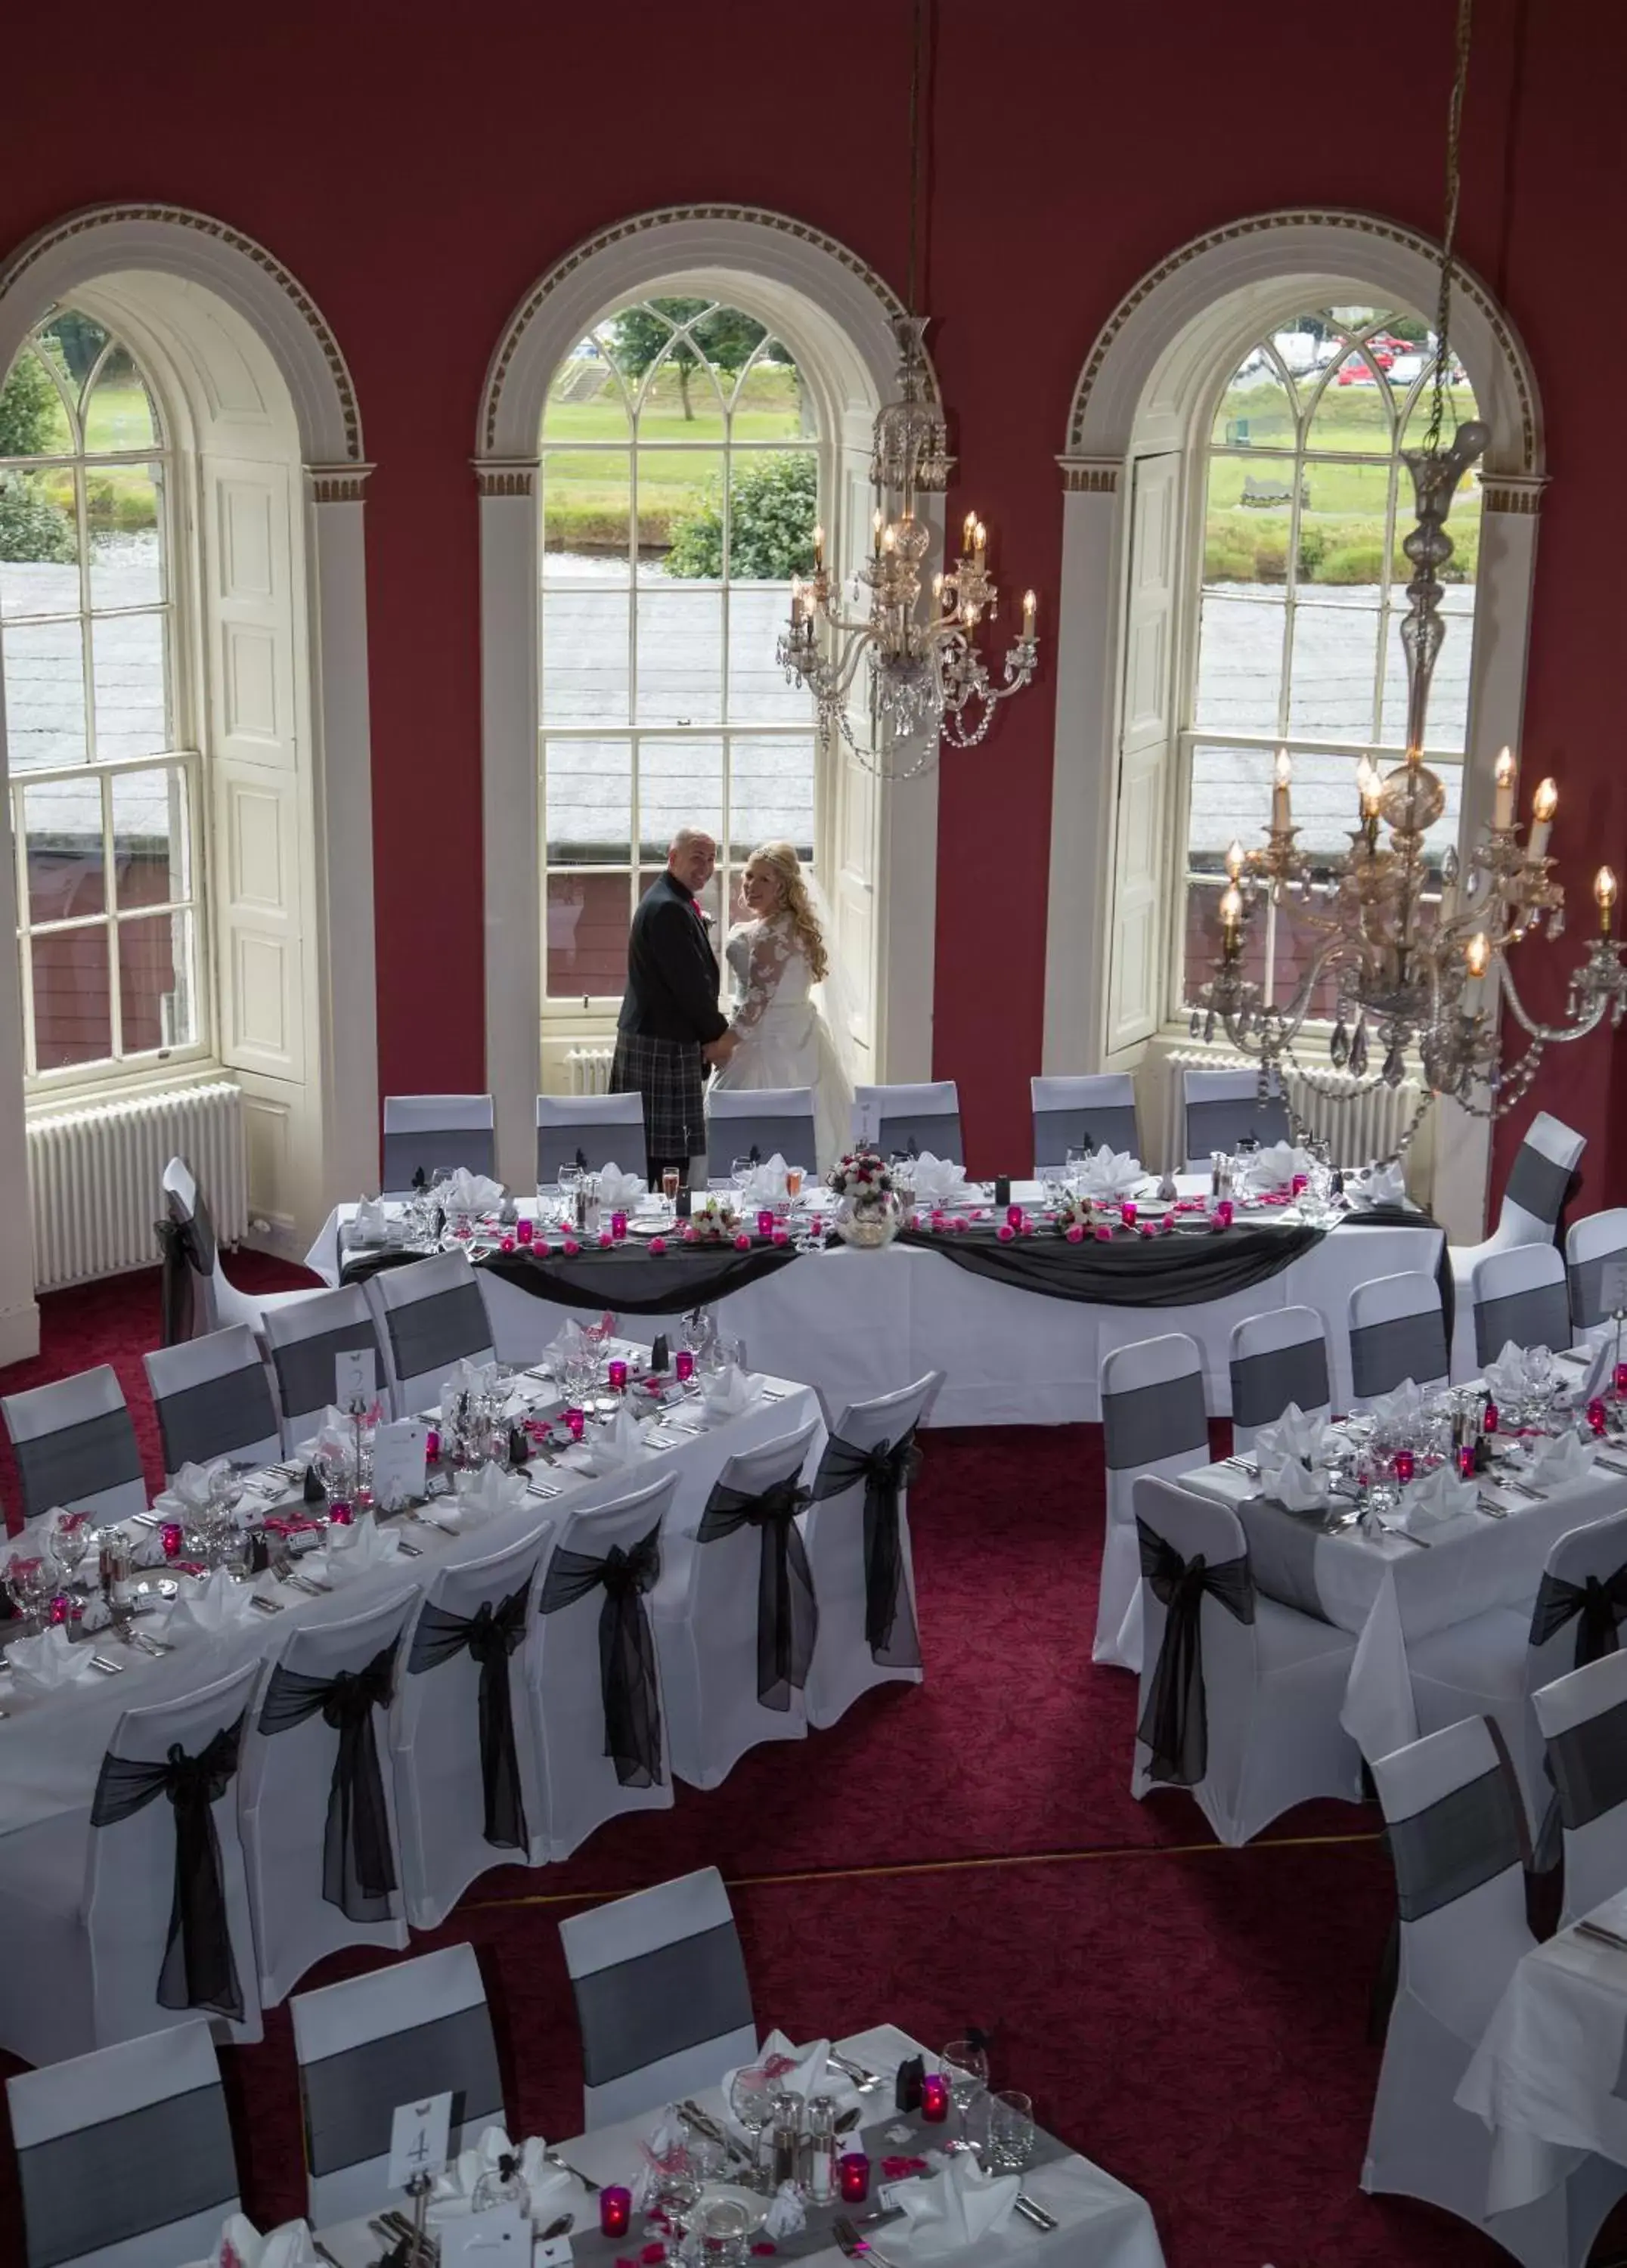 Bird's eye view, Banquet Facilities in The Tontine Hotel